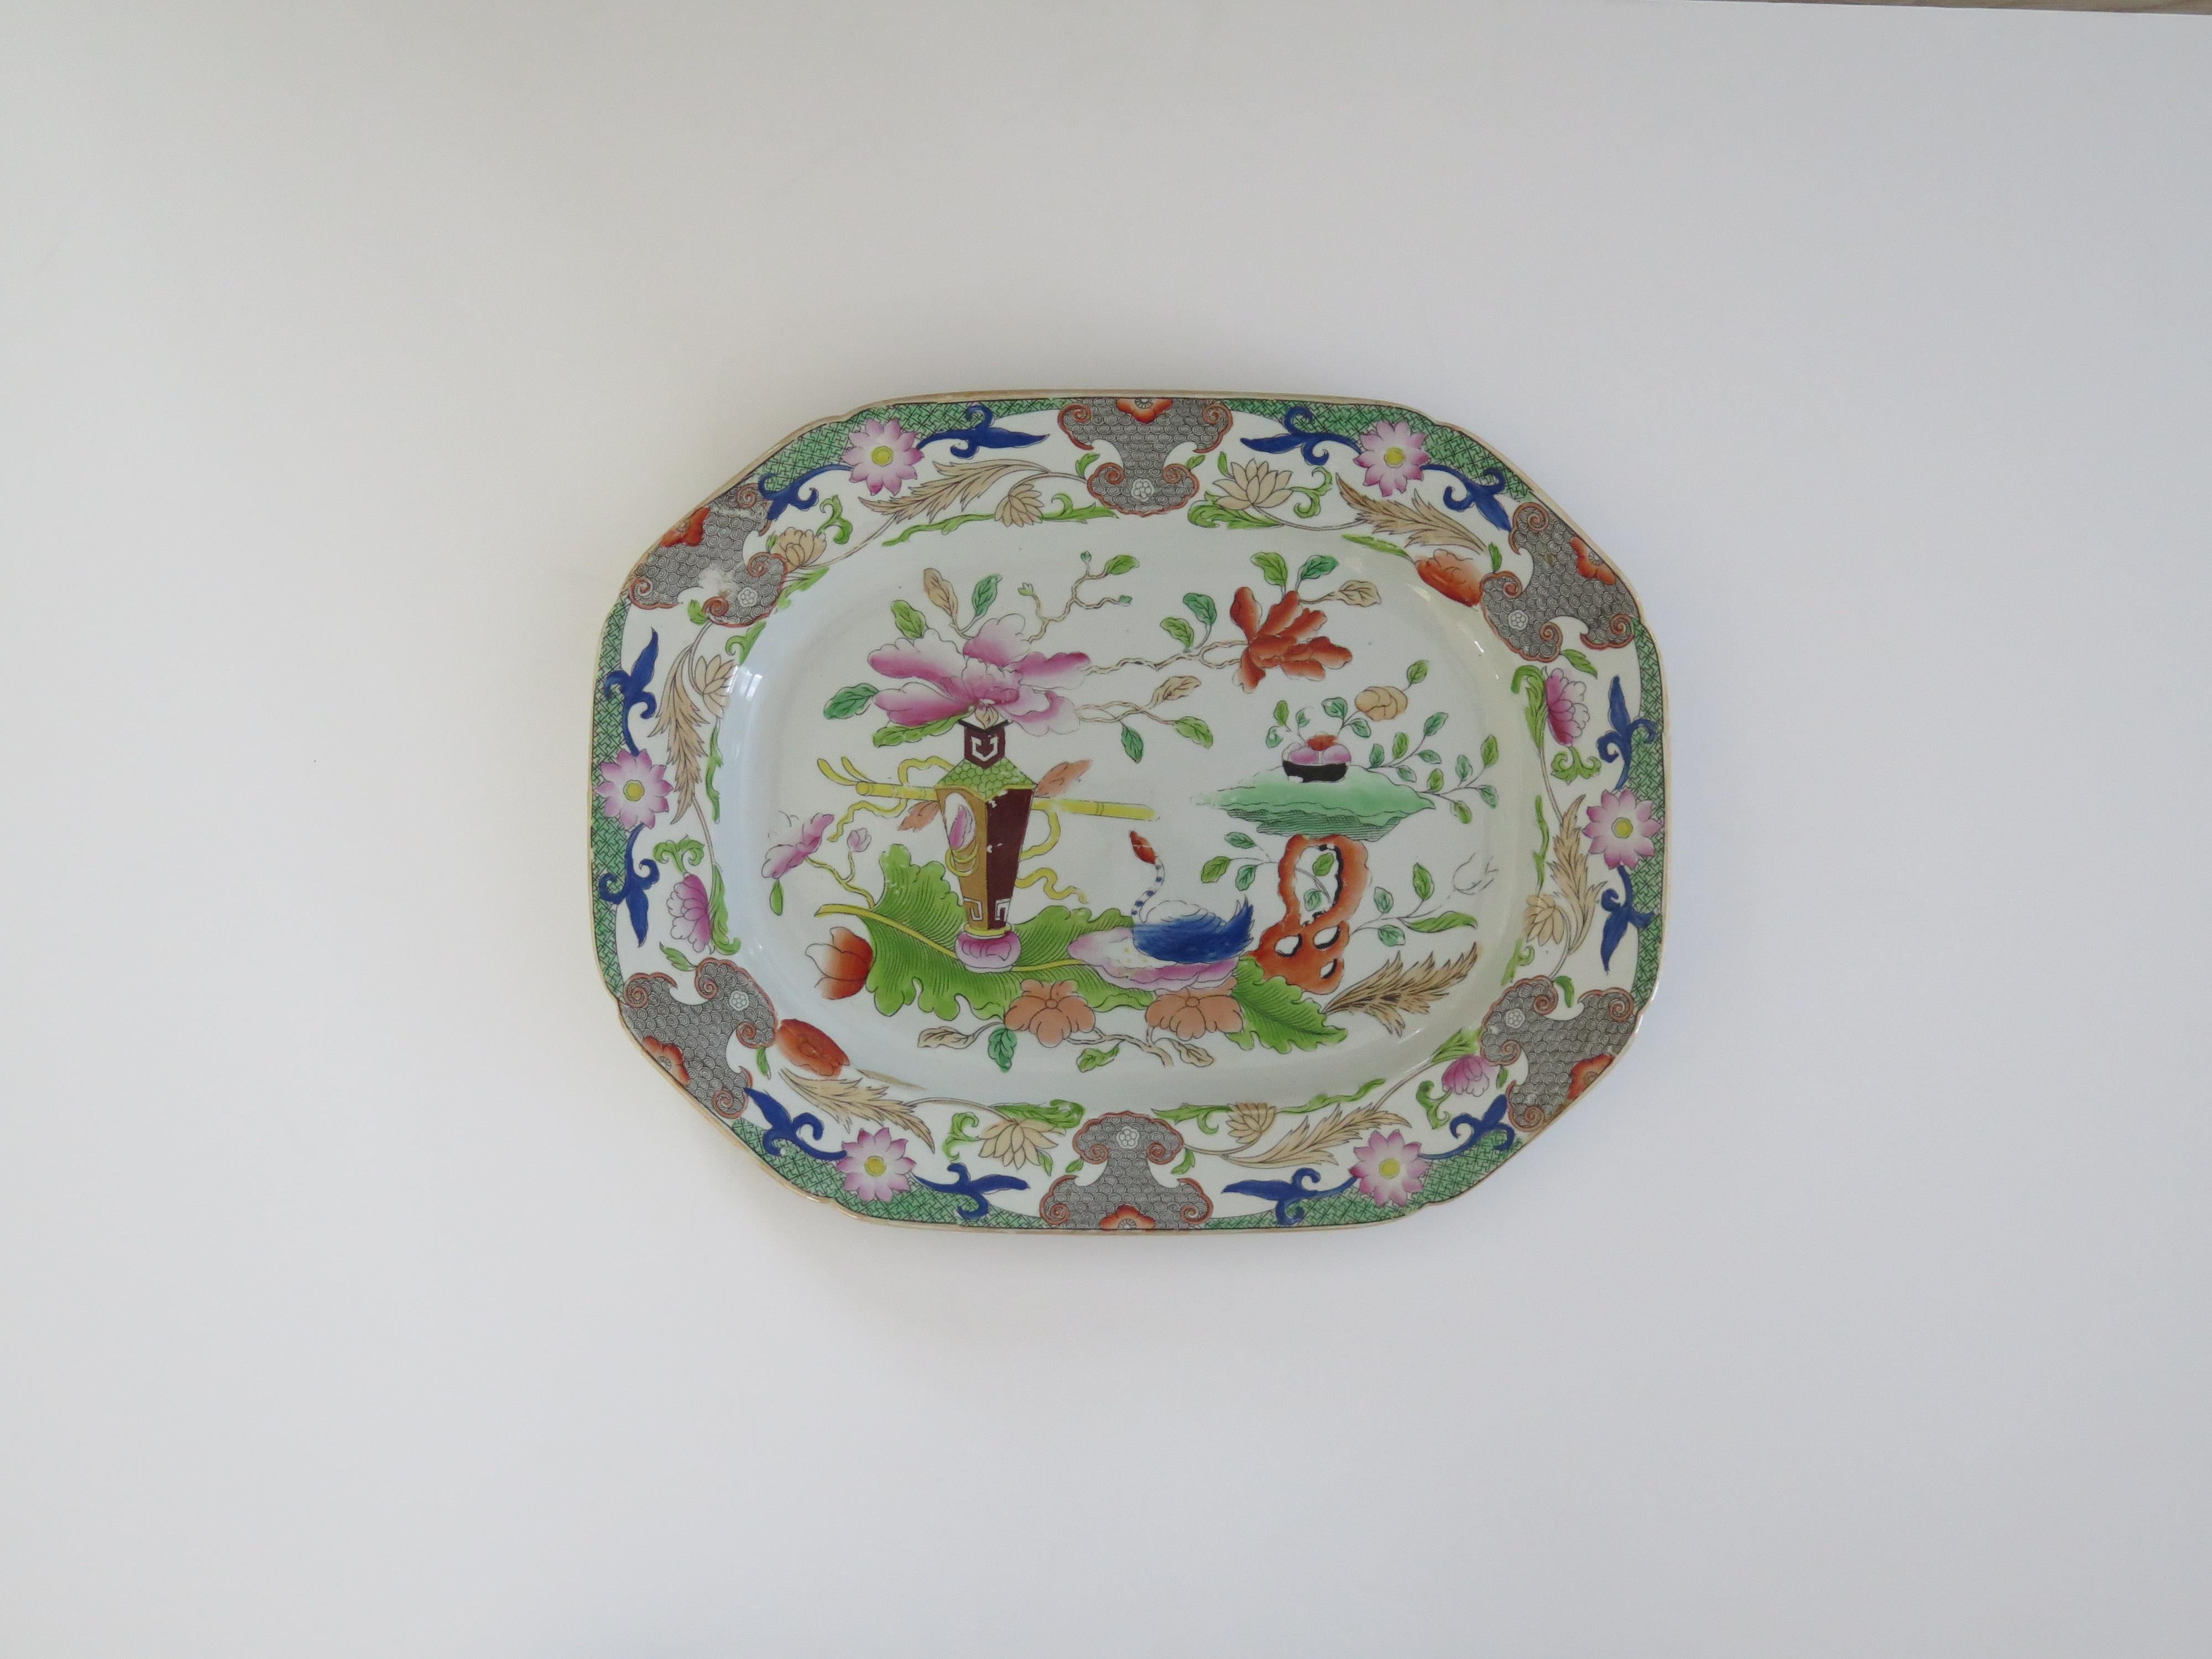 This is a very good hand painted Mason's ironstone large Platter or Meat Plate, in the Table and Flowerpot gilded pattern, from their earliest George IIIrd period, circa 1818.

The piece is well potted with an oval octagonal shape having indented